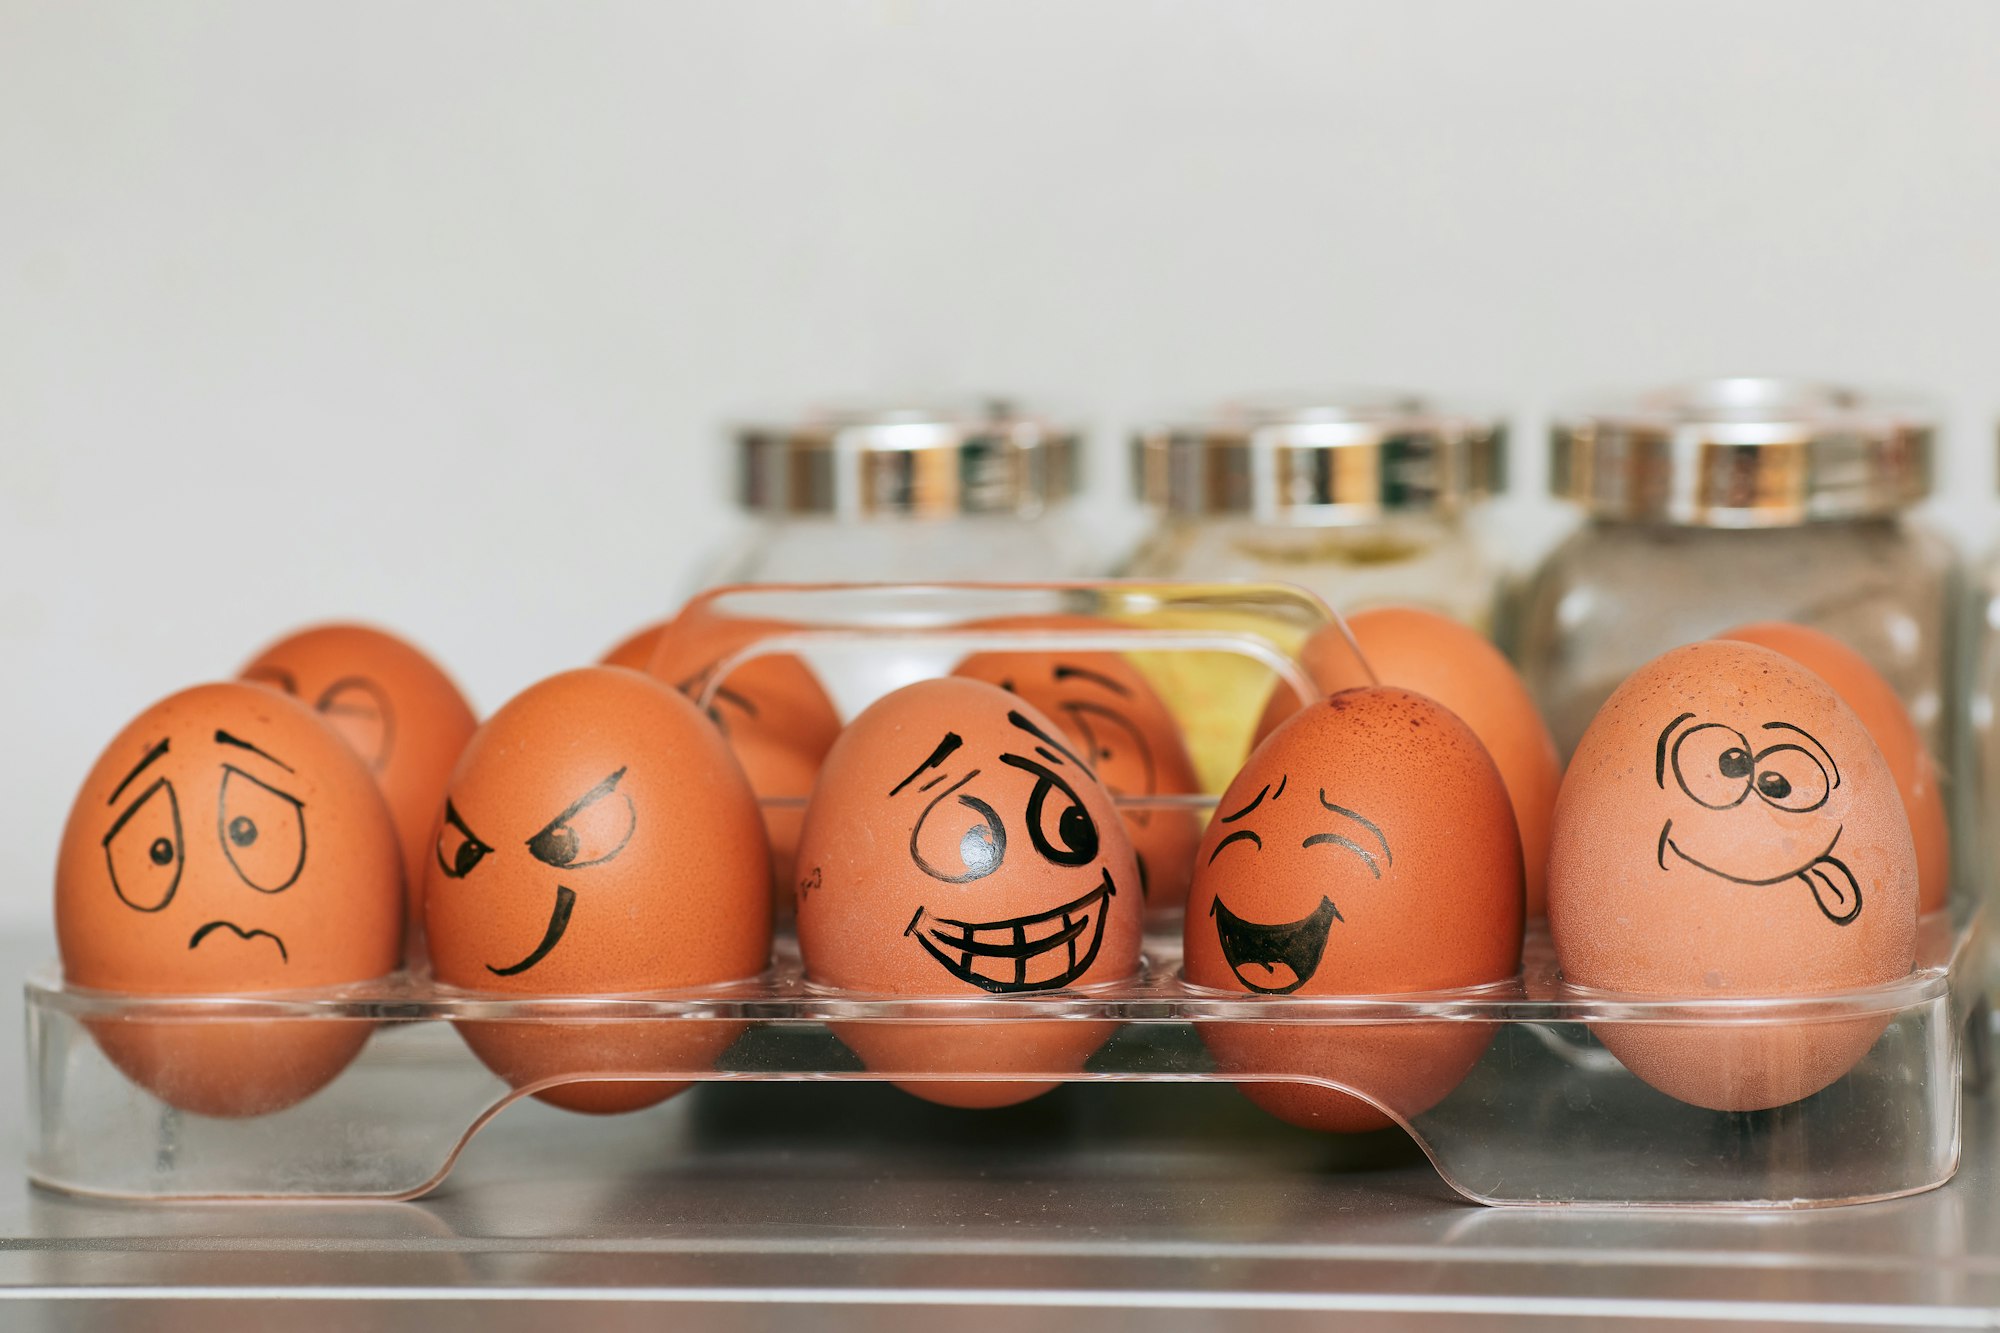  Carton of eggs with unique drawn faces depicting various moods associated with PMDD.